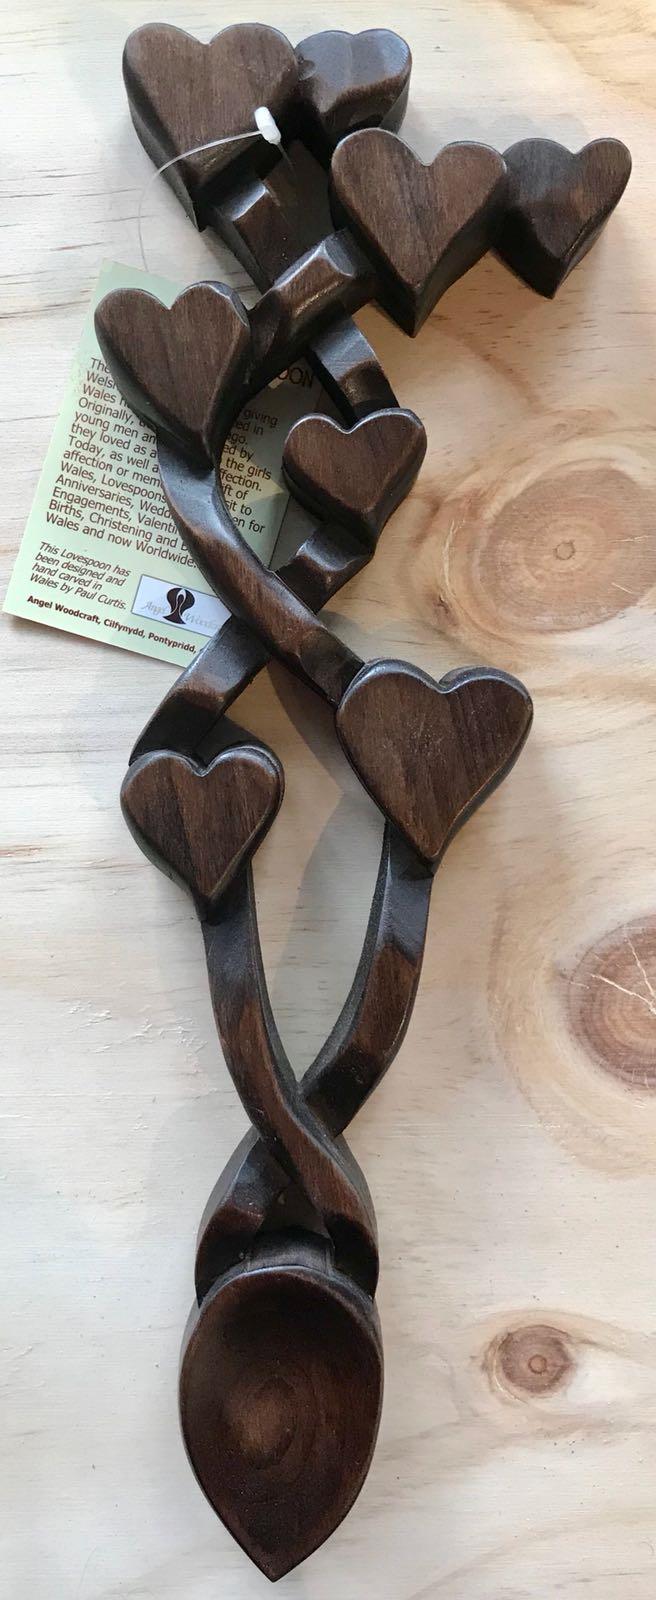 Hearts & Twisted Stem Lovespoon